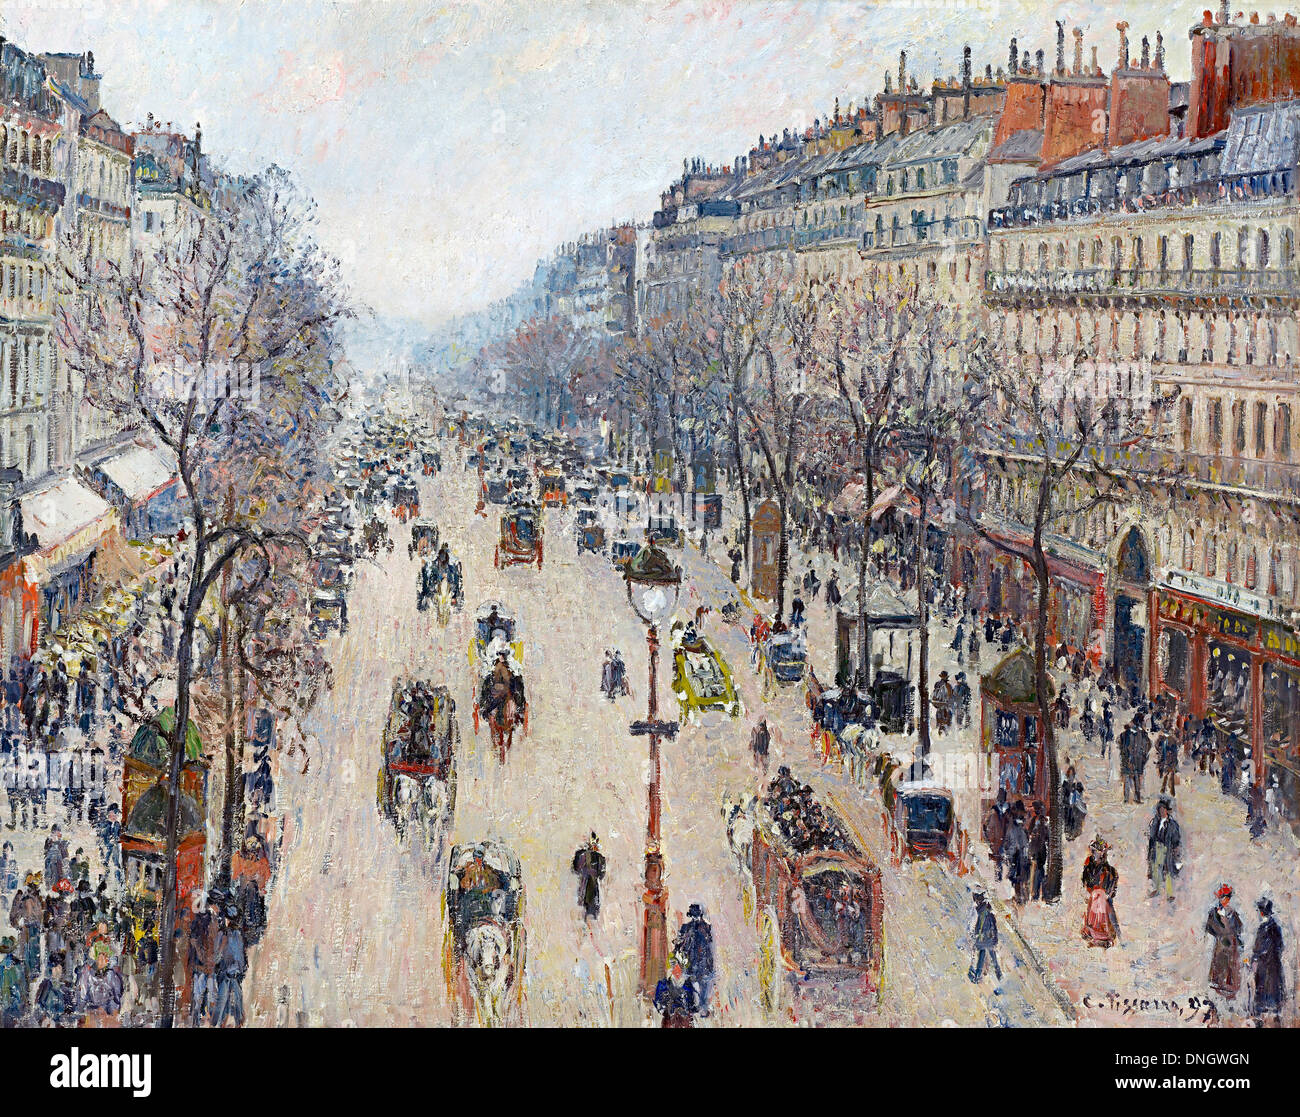 Camille Pissarro, Boulevard Montmartre, morning, cloudy weather 1897 Oil on canvas. National Gallery of Victoria, Australia. Stock Photo